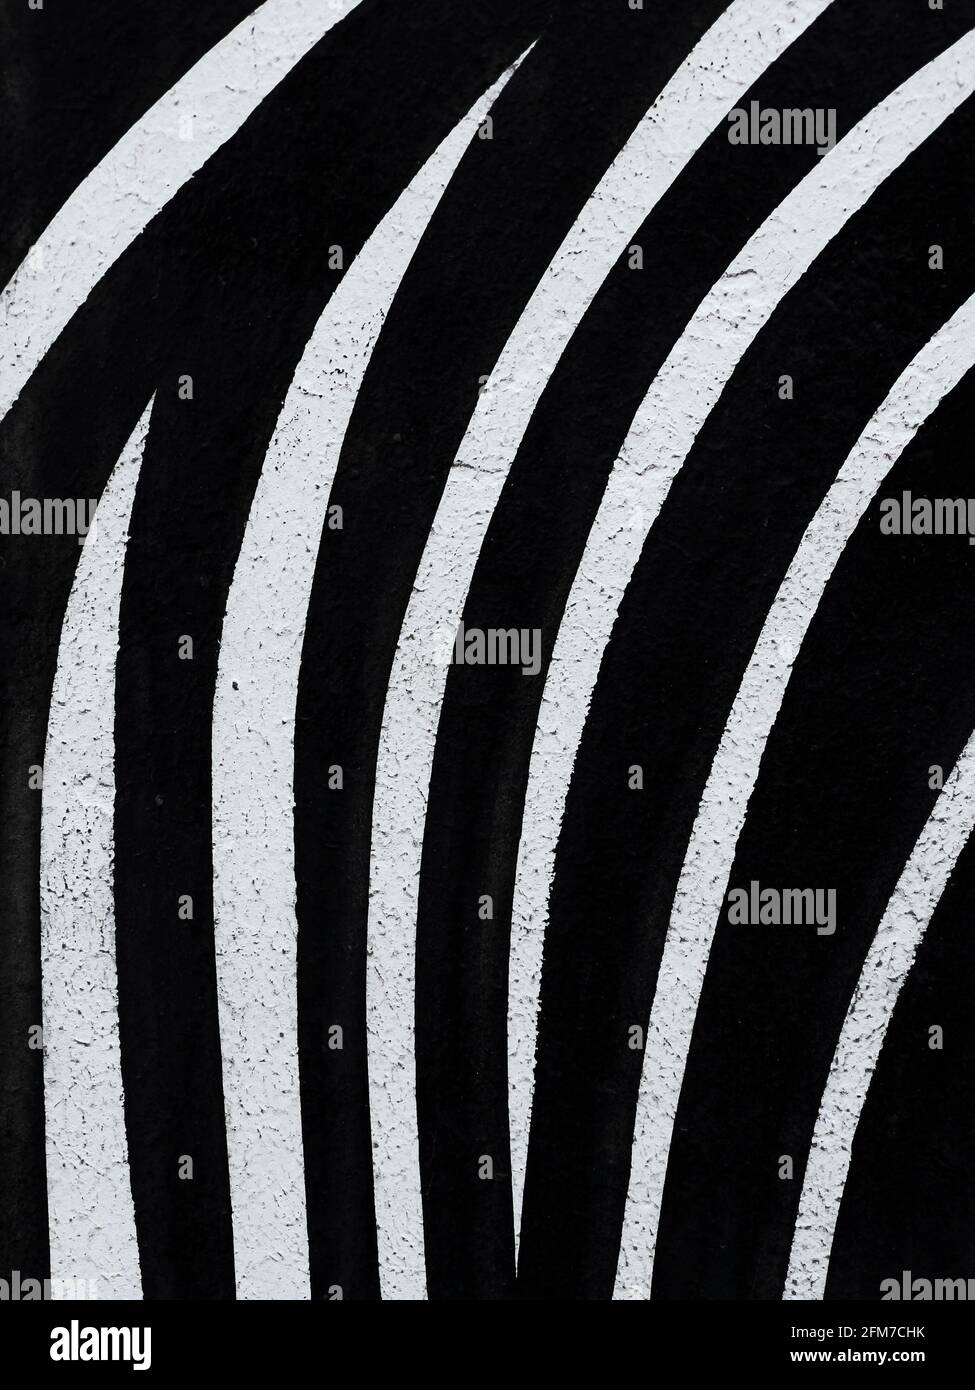 Basel, Switzerland - February 14, 2021: Abstract detail of black and white lines on the wall Stock Photo